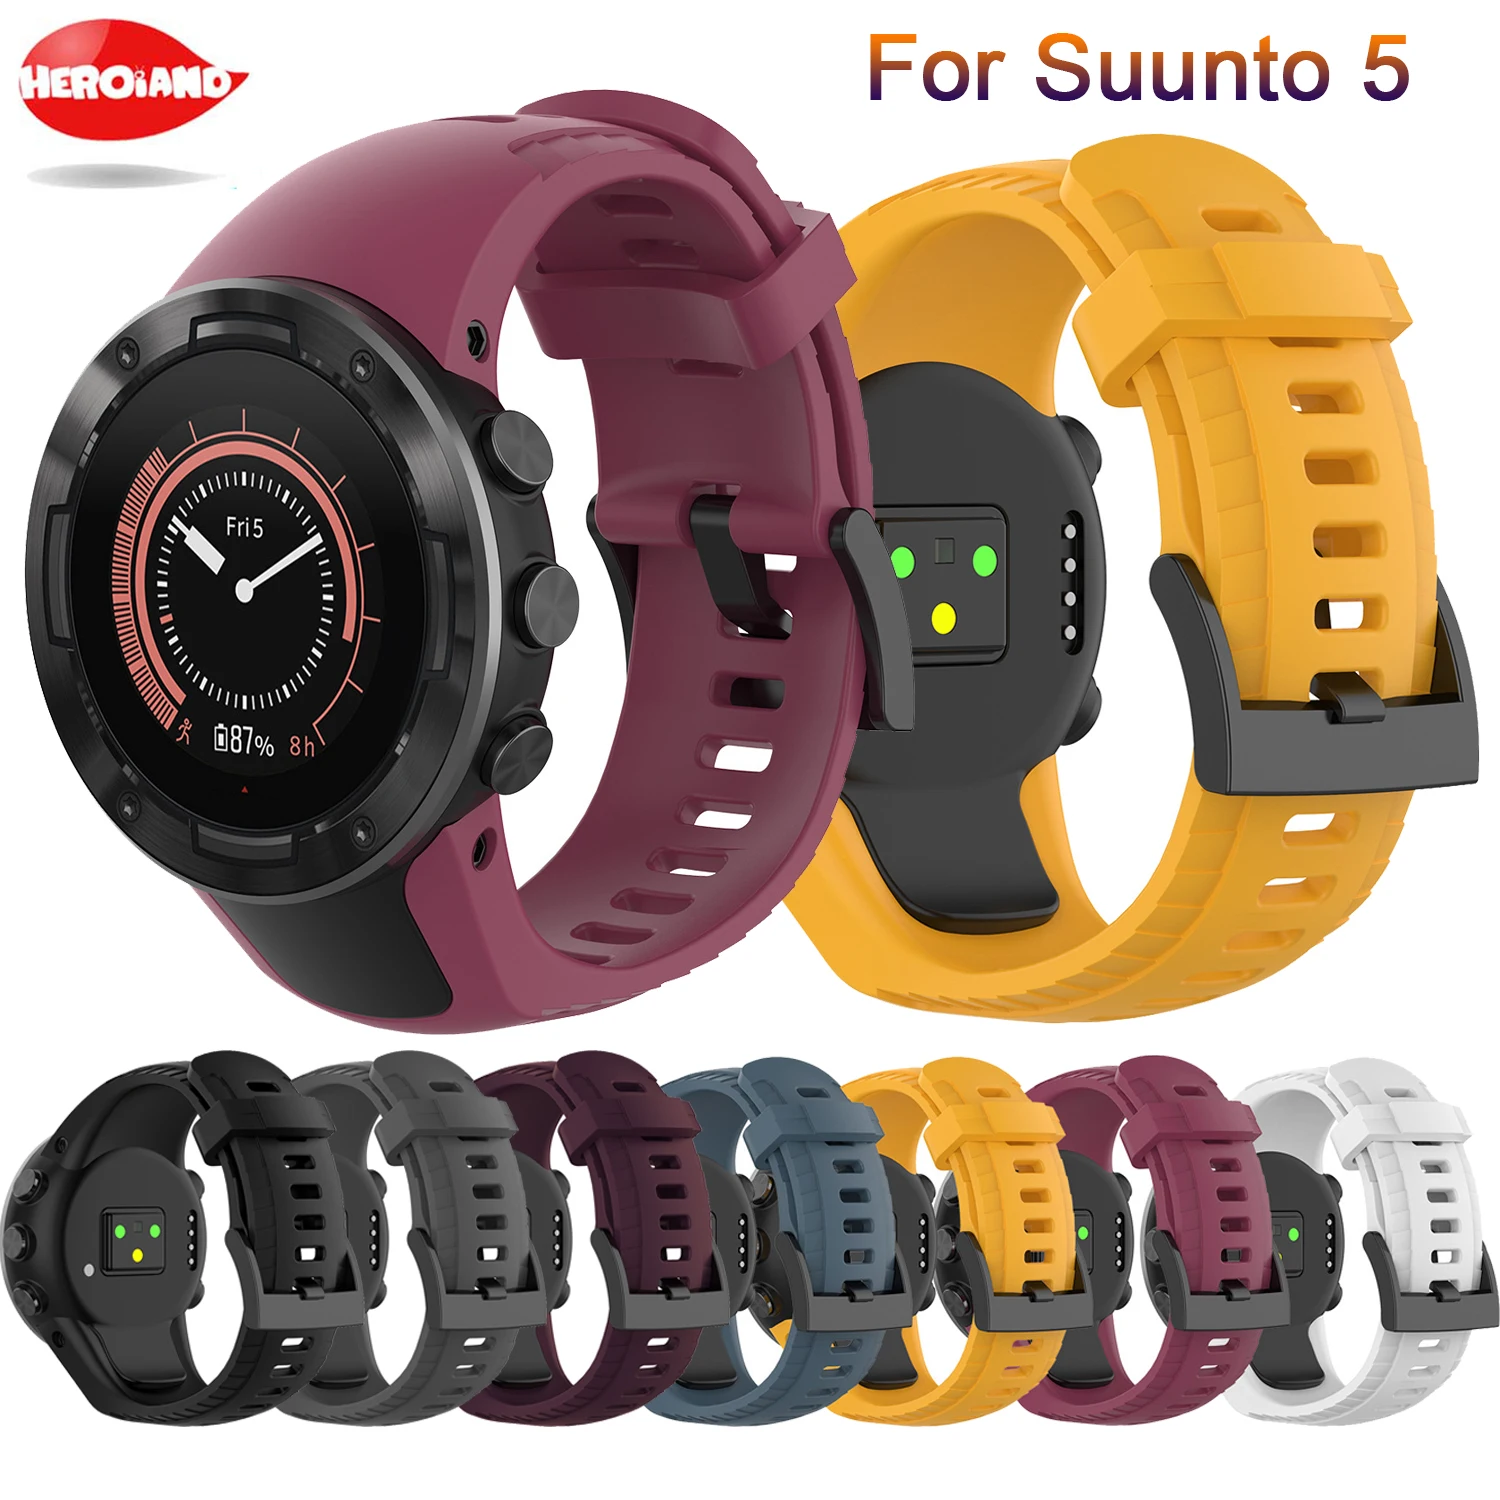 For Suunto 5 Smartwatch Wristband outdoors Sports Accessories Silicone Replacement WatchBand Wrist S